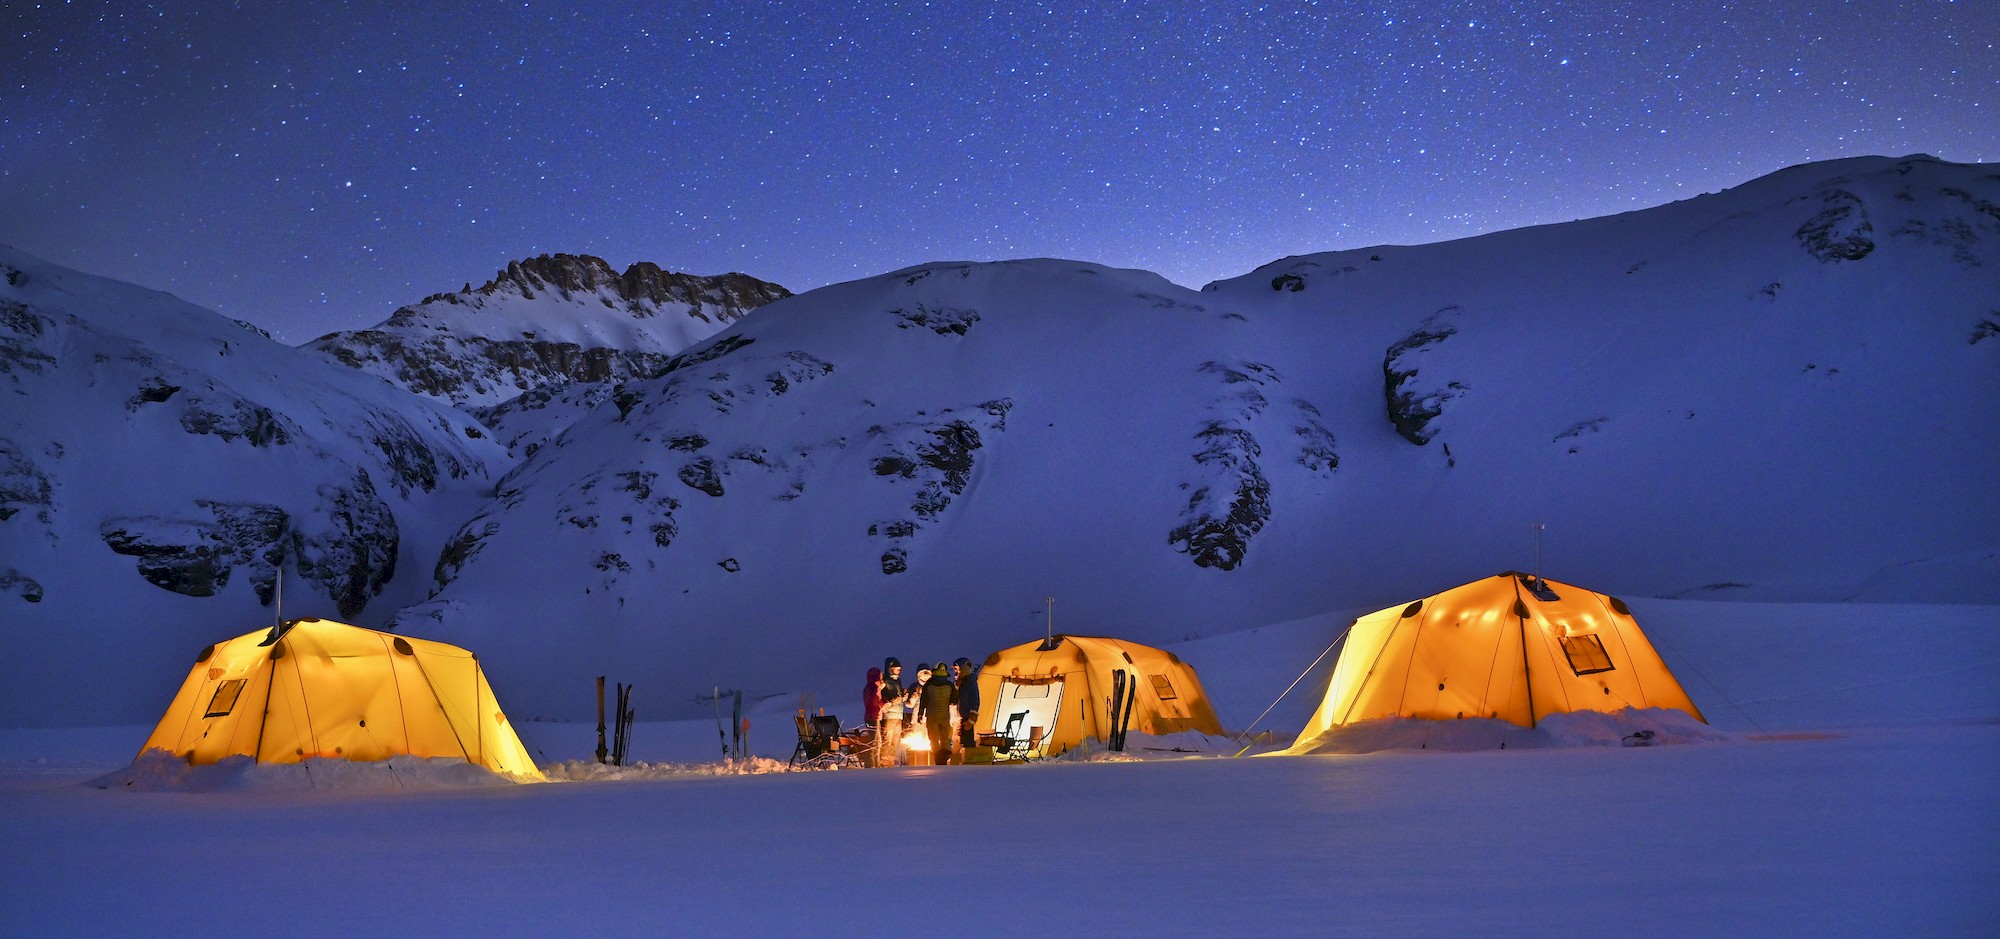 Telluride Backcountry Ski Camps